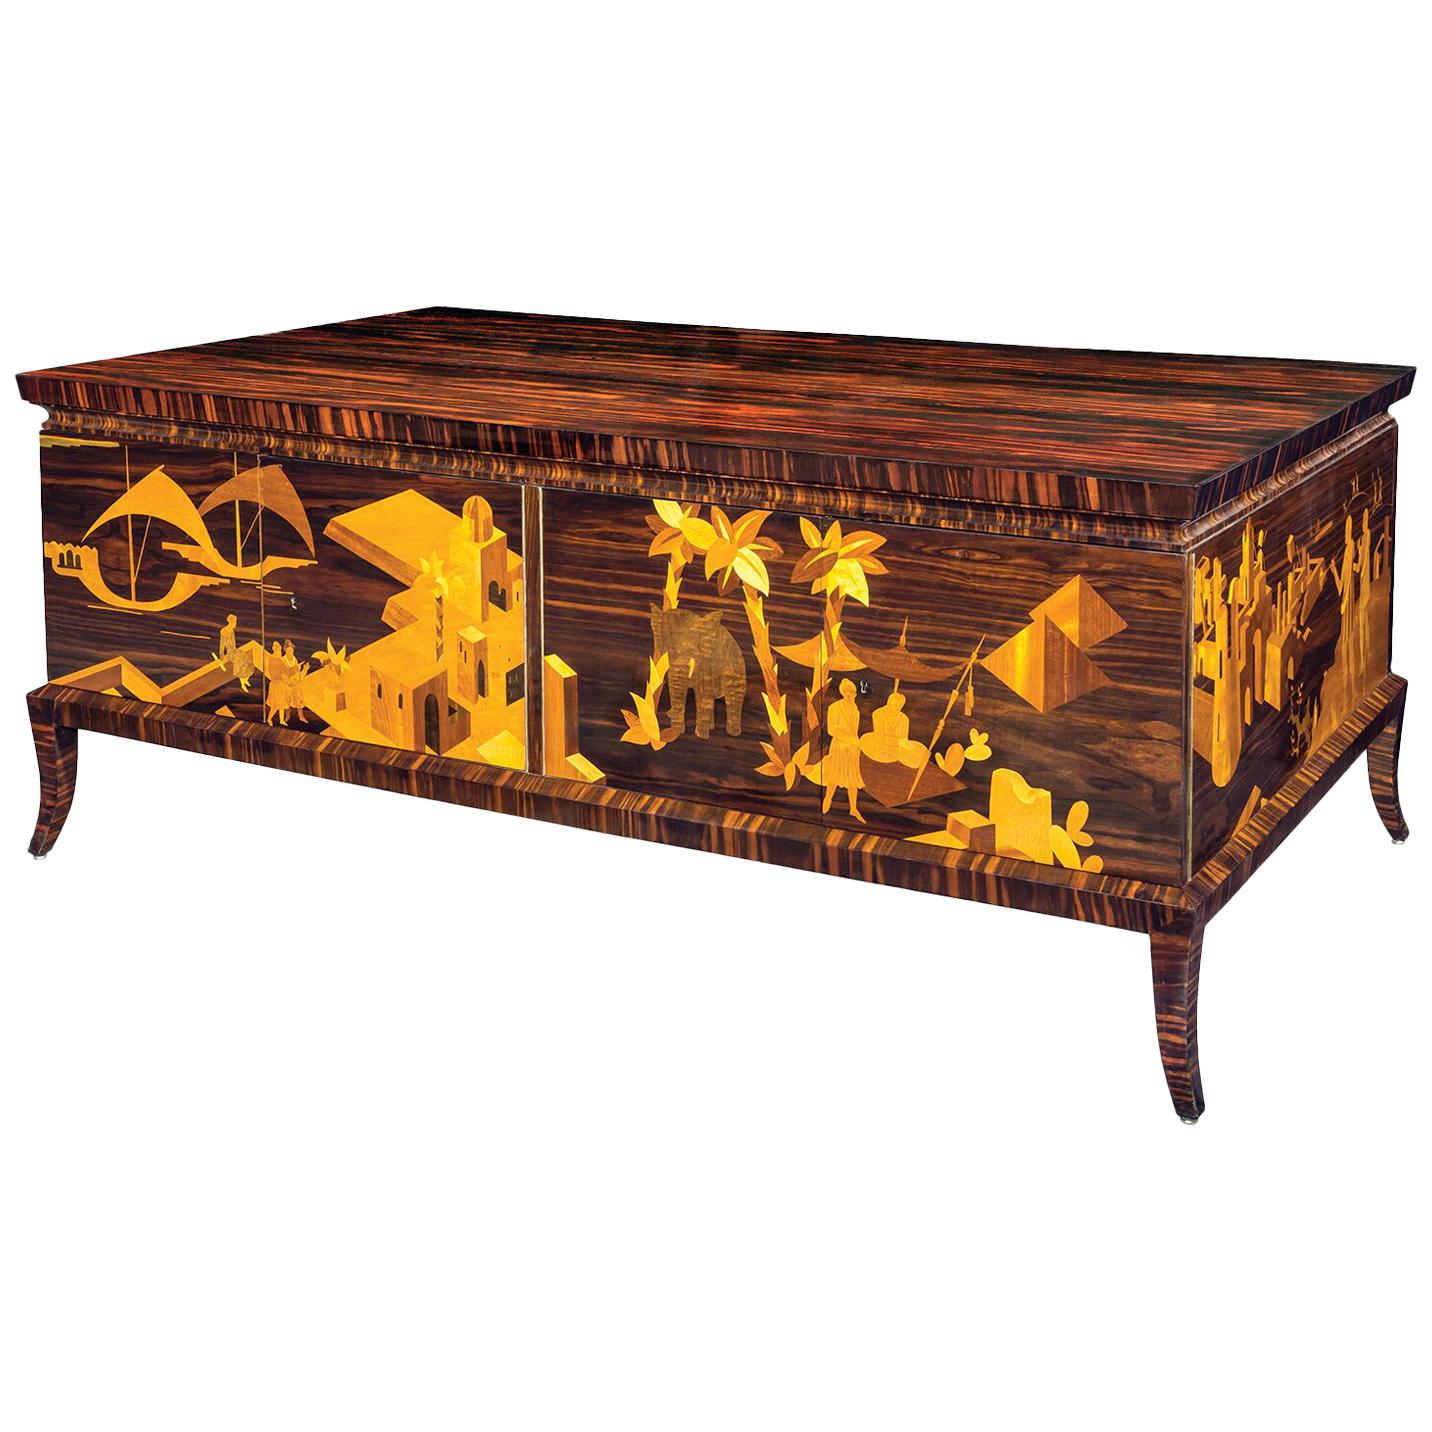 Magnificent Art Deco Palisander and Satinwood Marquetry Desk, Belgian, 1930 For Sale